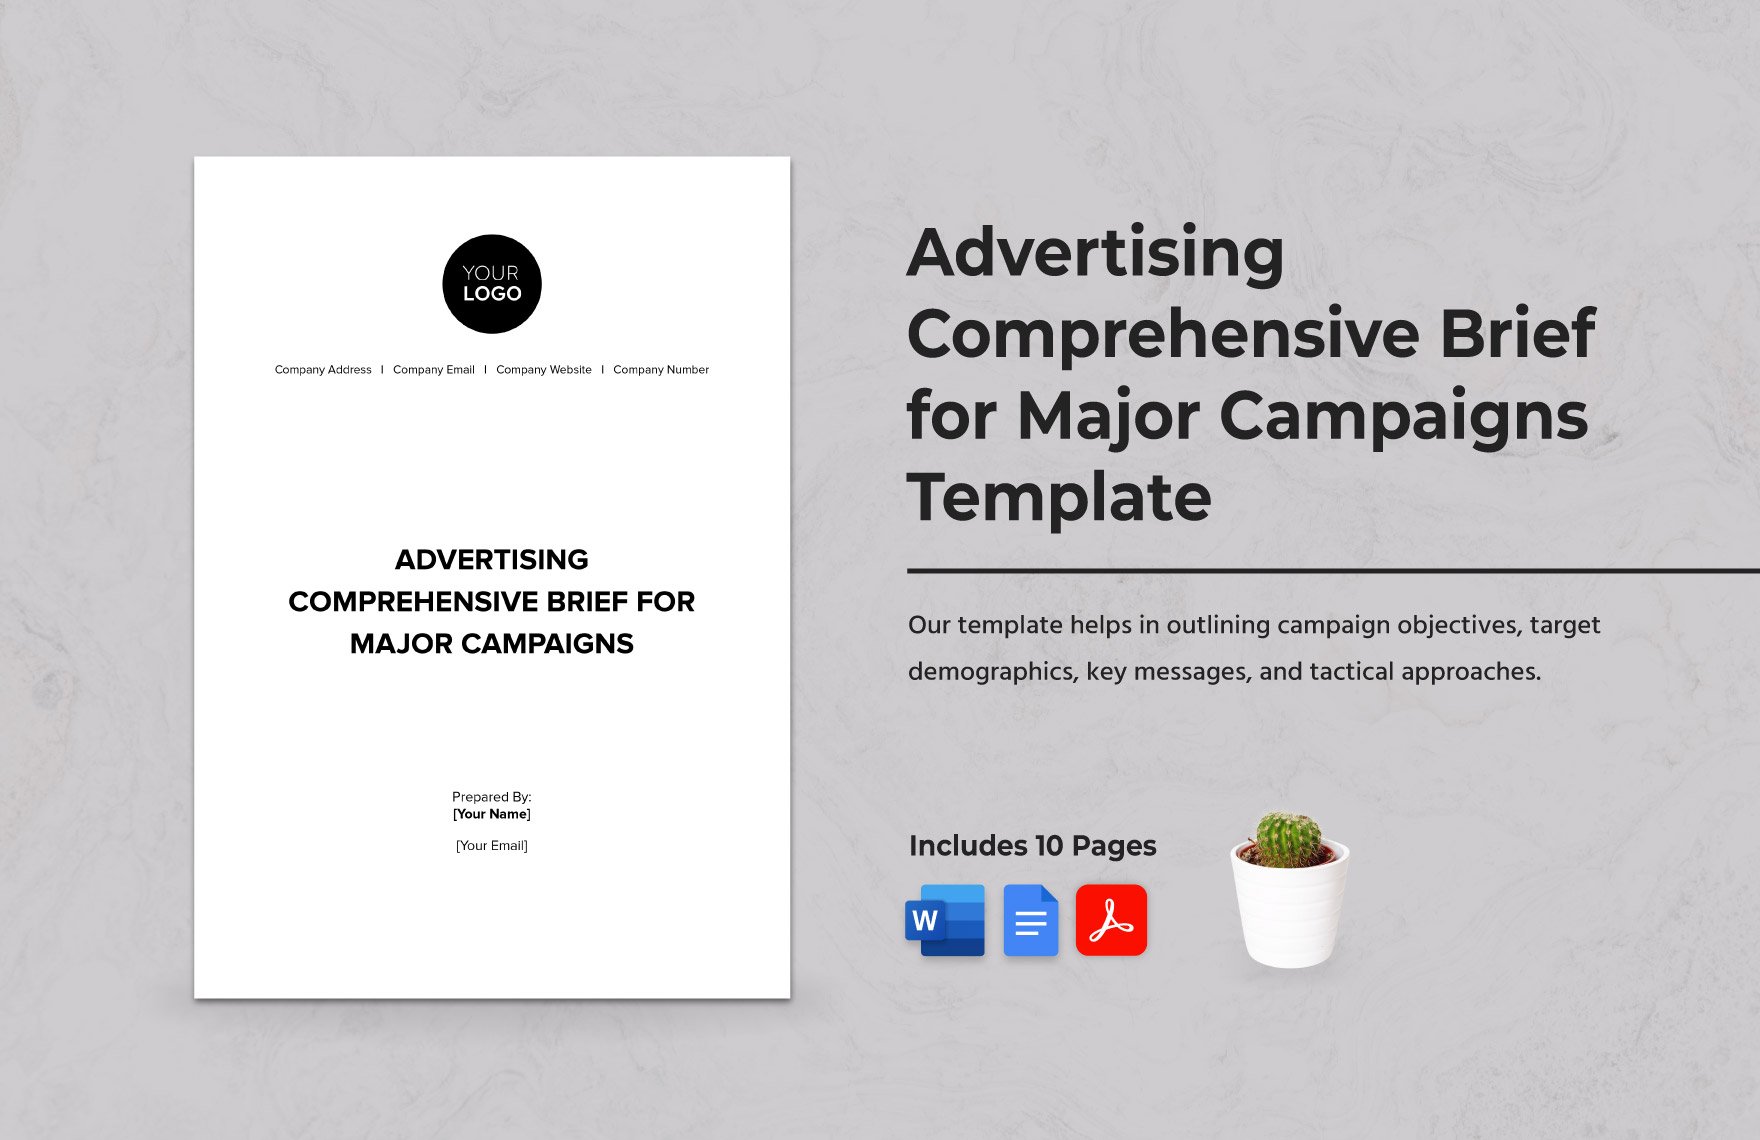 Advertising Comprehensive Brief for Major Campaigns Template in Word, Google Docs, PDF